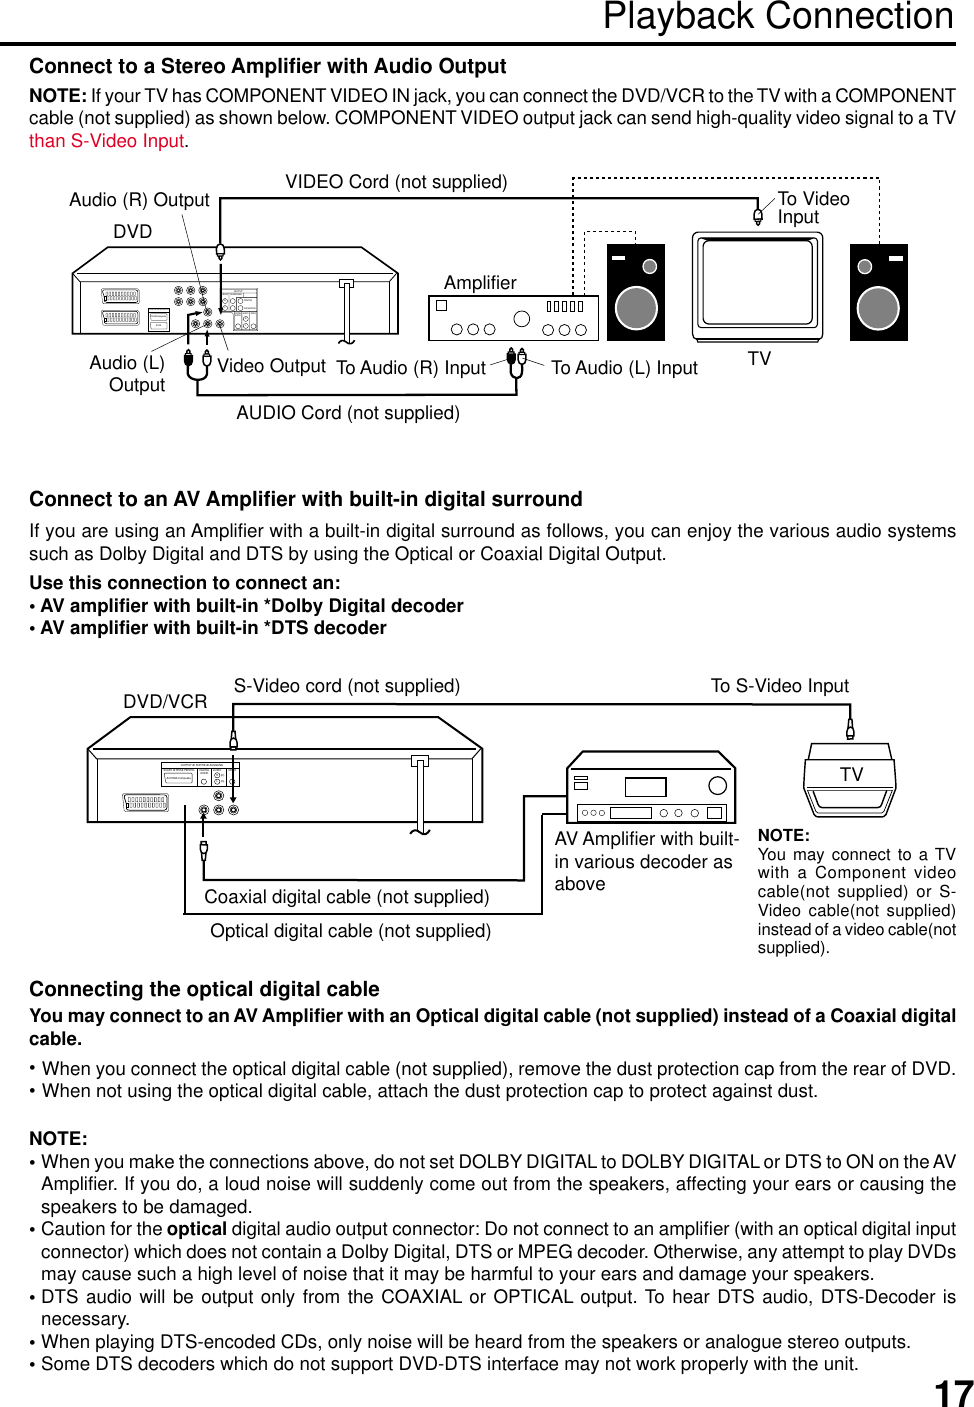 17A/V-RGB-CompositeDIGITALAUDIO VIDEOAUDIO(D)(G)RLOUTPUT Æ SORTIE Æ AUSGANGSCART Æ PRISE PERITELConnect to an AV Amplifier with built-in digital surroundIf you are using an Amplifier with a built-in digital surround as follows, you can enjoy the various audio systemssuch as Dolby Digital and DTS by using the Optical or Coaxial Digital Output.Use this connection to connect an:• AV amplifier with built-in *Dolby Digital decoder• AV amplifier with built-in *DTS decoderPlayback ConnectionConnect to a Stereo Amplifier with Audio OutputNOTE:•••••When you make the connections above, do not set DOLBY DIGITAL to DOLBY DIGITAL or DTS to ON on the AVAmplifier. If you do, a loud noise will suddenly come out from the speakers, affecting your ears or causing thespeakers to be damaged.Caution for the optical digital audio output connector: Do not connect to an amplifier (with an optical digital inputconnector) which does not contain a Dolby Digital, DTS or MPEG decoder. Otherwise, any attempt to play DVDsmay cause such a high level of noise that it may be harmful to your ears and damage your speakers.DTS audio will be output only from the COAXIAL or OPTICAL output. To hear DTS audio, DTS-Decoder isnecessary.When playing DTS-encoded CDs, only noise will be heard from the speakers or analogue stereo outputs.Some DTS decoders which do not support DVD-DTS interface may not work properly with the unit.S-Video cord (not supplied) To S-Video InputCoaxial digital cable (not supplied)AV Amplifier with built-in various decoder asaboveDVD/VCRTVOptical digital cable (not supplied)Connecting the optical digital cableWhen you connect the optical digital cable (not supplied), remove the dust protection cap from the rear of DVD.When not using the optical digital cable, attach the dust protection cap to protect against dust.••NOTE: If your TV has COMPONENT VIDEO IN jack, you can connect the DVD/VCR to the TV with a COMPONENTcable (not supplied) as shown below. COMPONENT VIDEO output jack can send high-quality video signal to a TVthan S-Video Input.You may connect to an AV Amplifier with an Optical digital cable (not supplied) instead of a Coaxial digitalcable.NOTE:You may connect to a TVwith a Component videocable(not supplied) or S-Video cable(not supplied)instead of a video cable(notsupplied).OUTPUTFRONTRLSURROUNDDIGITALAUDIO AUDIO VIDEOCENTERSUB WOOFERSCART Æ PRISE PERITELTV-RGB-CompositeA/V-INRLTo Audio (L) InputTo VideoInputTo Audio (R) InputVideo Output TVAUDIO Cord (not supplied)AmplifierVIDEO Cord (not supplied)DVDAudio (R) OutputAudio (L)Output